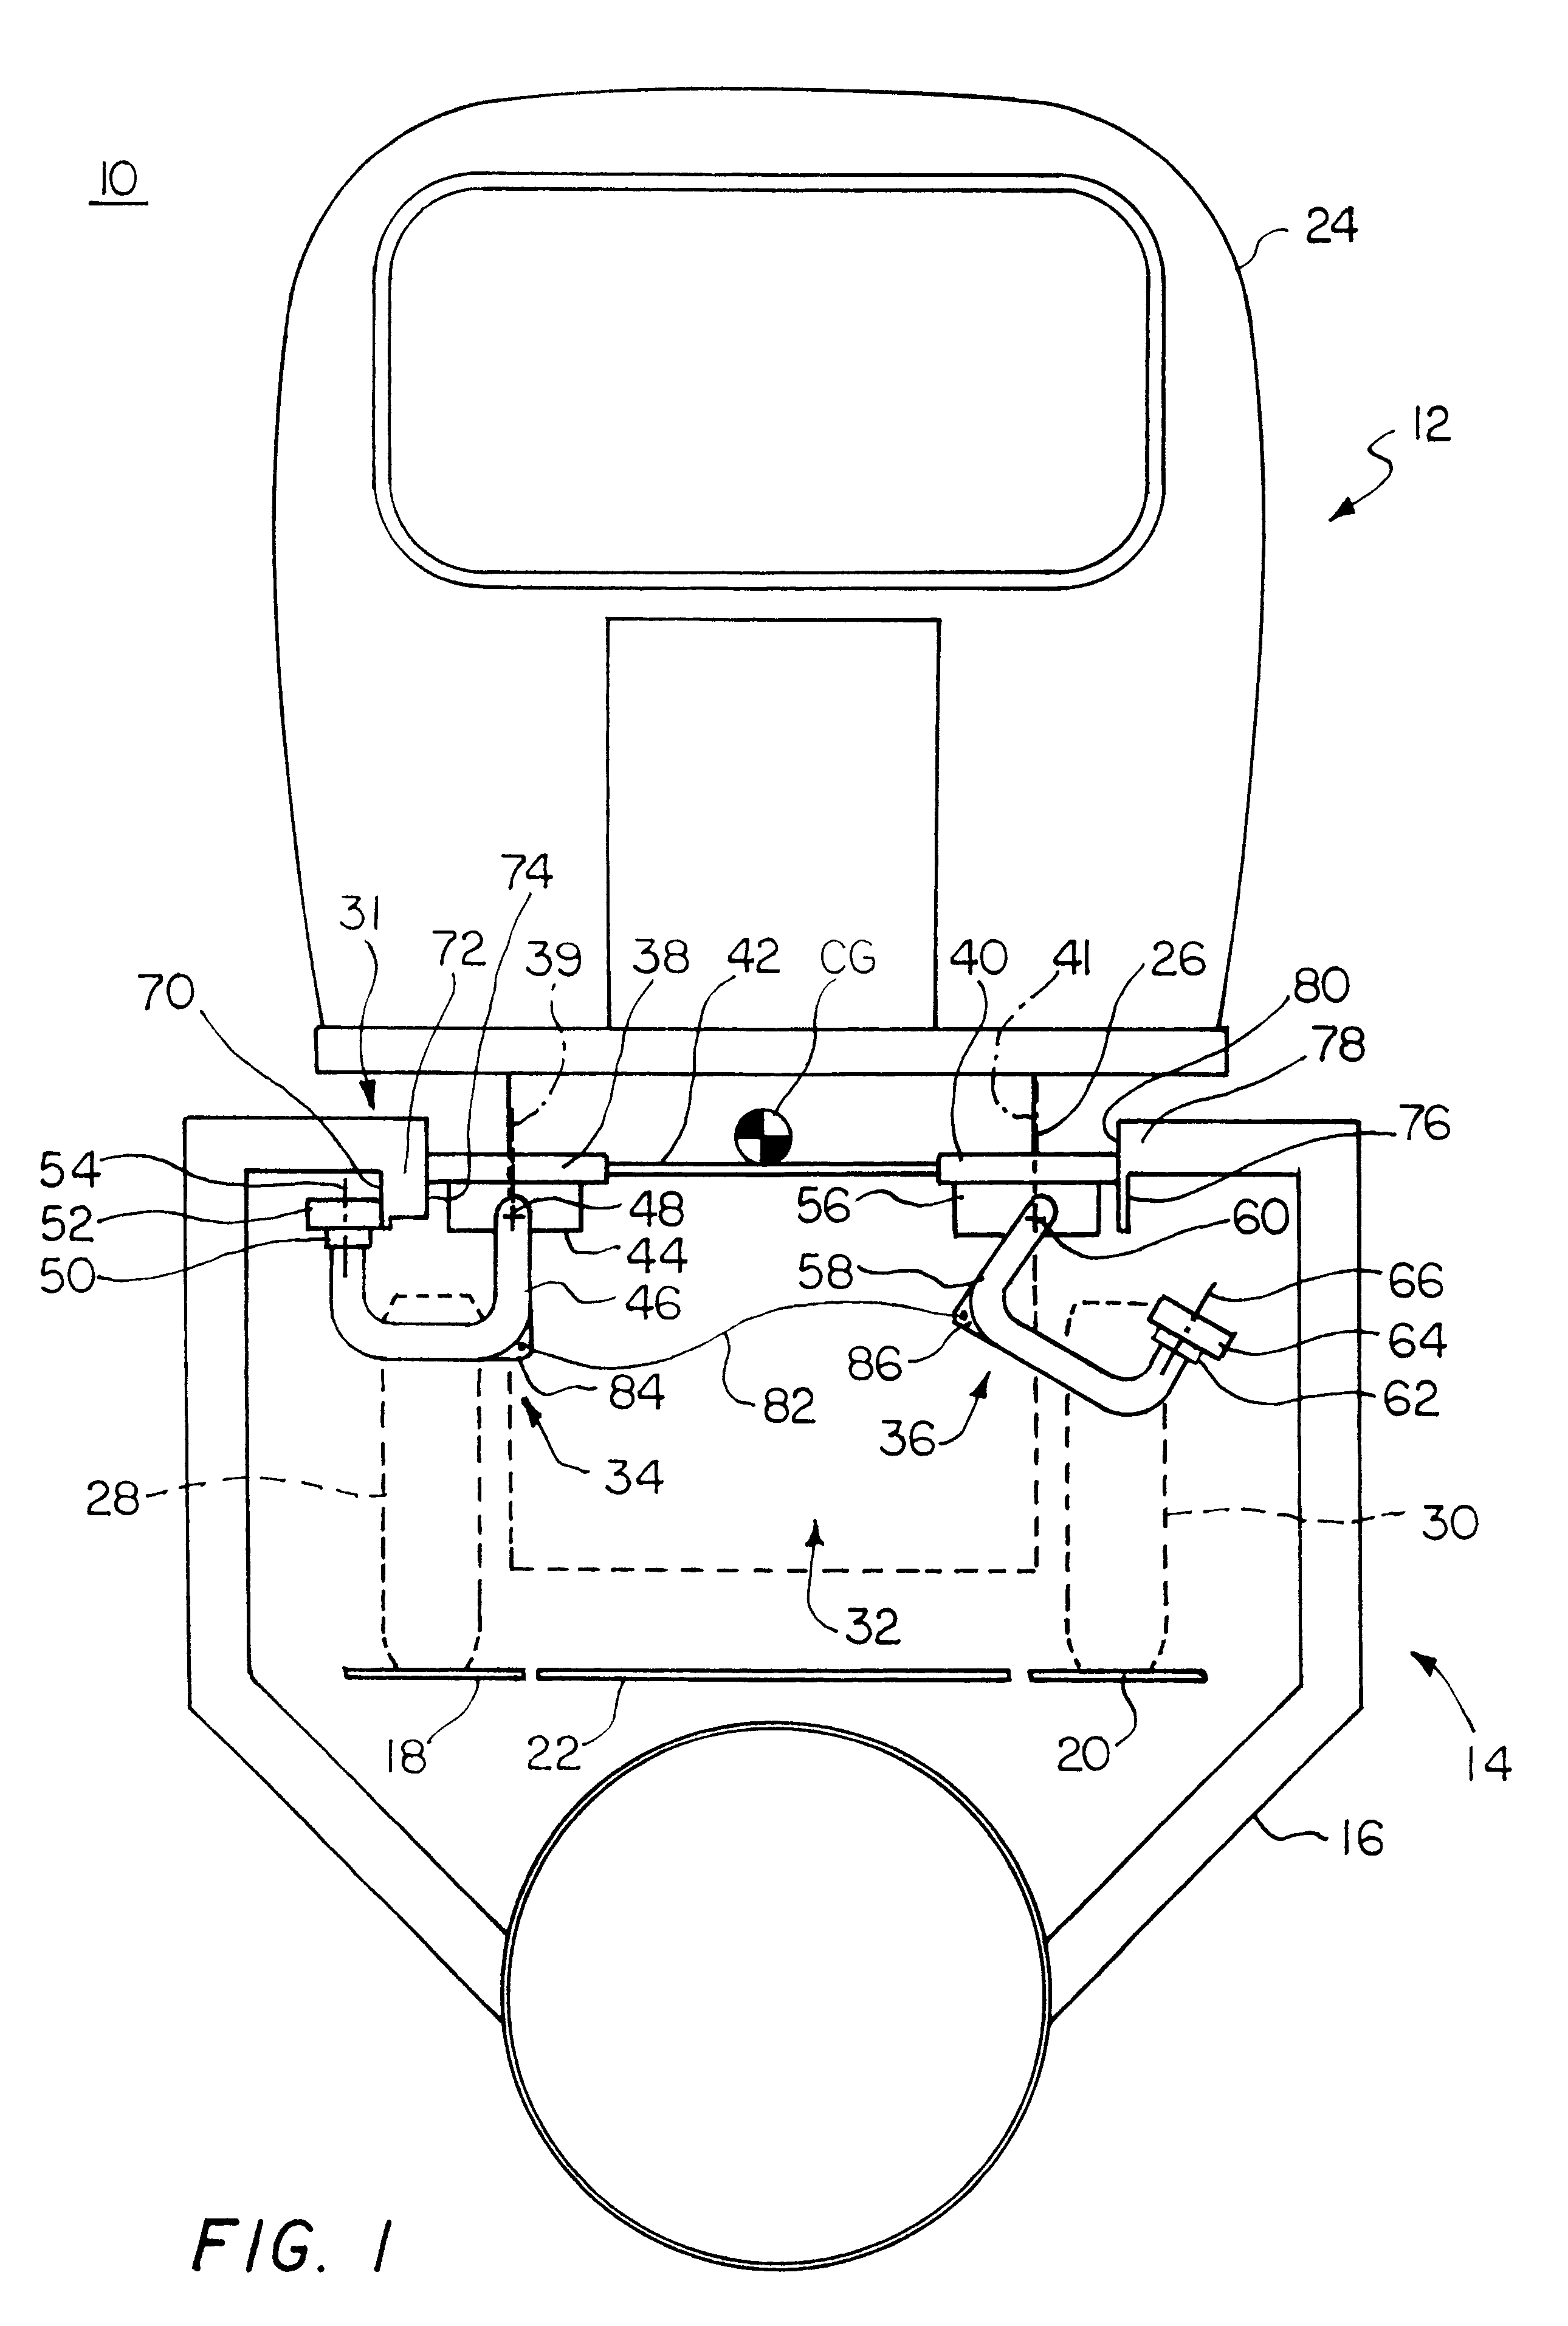 In-vehicle switch mechanism